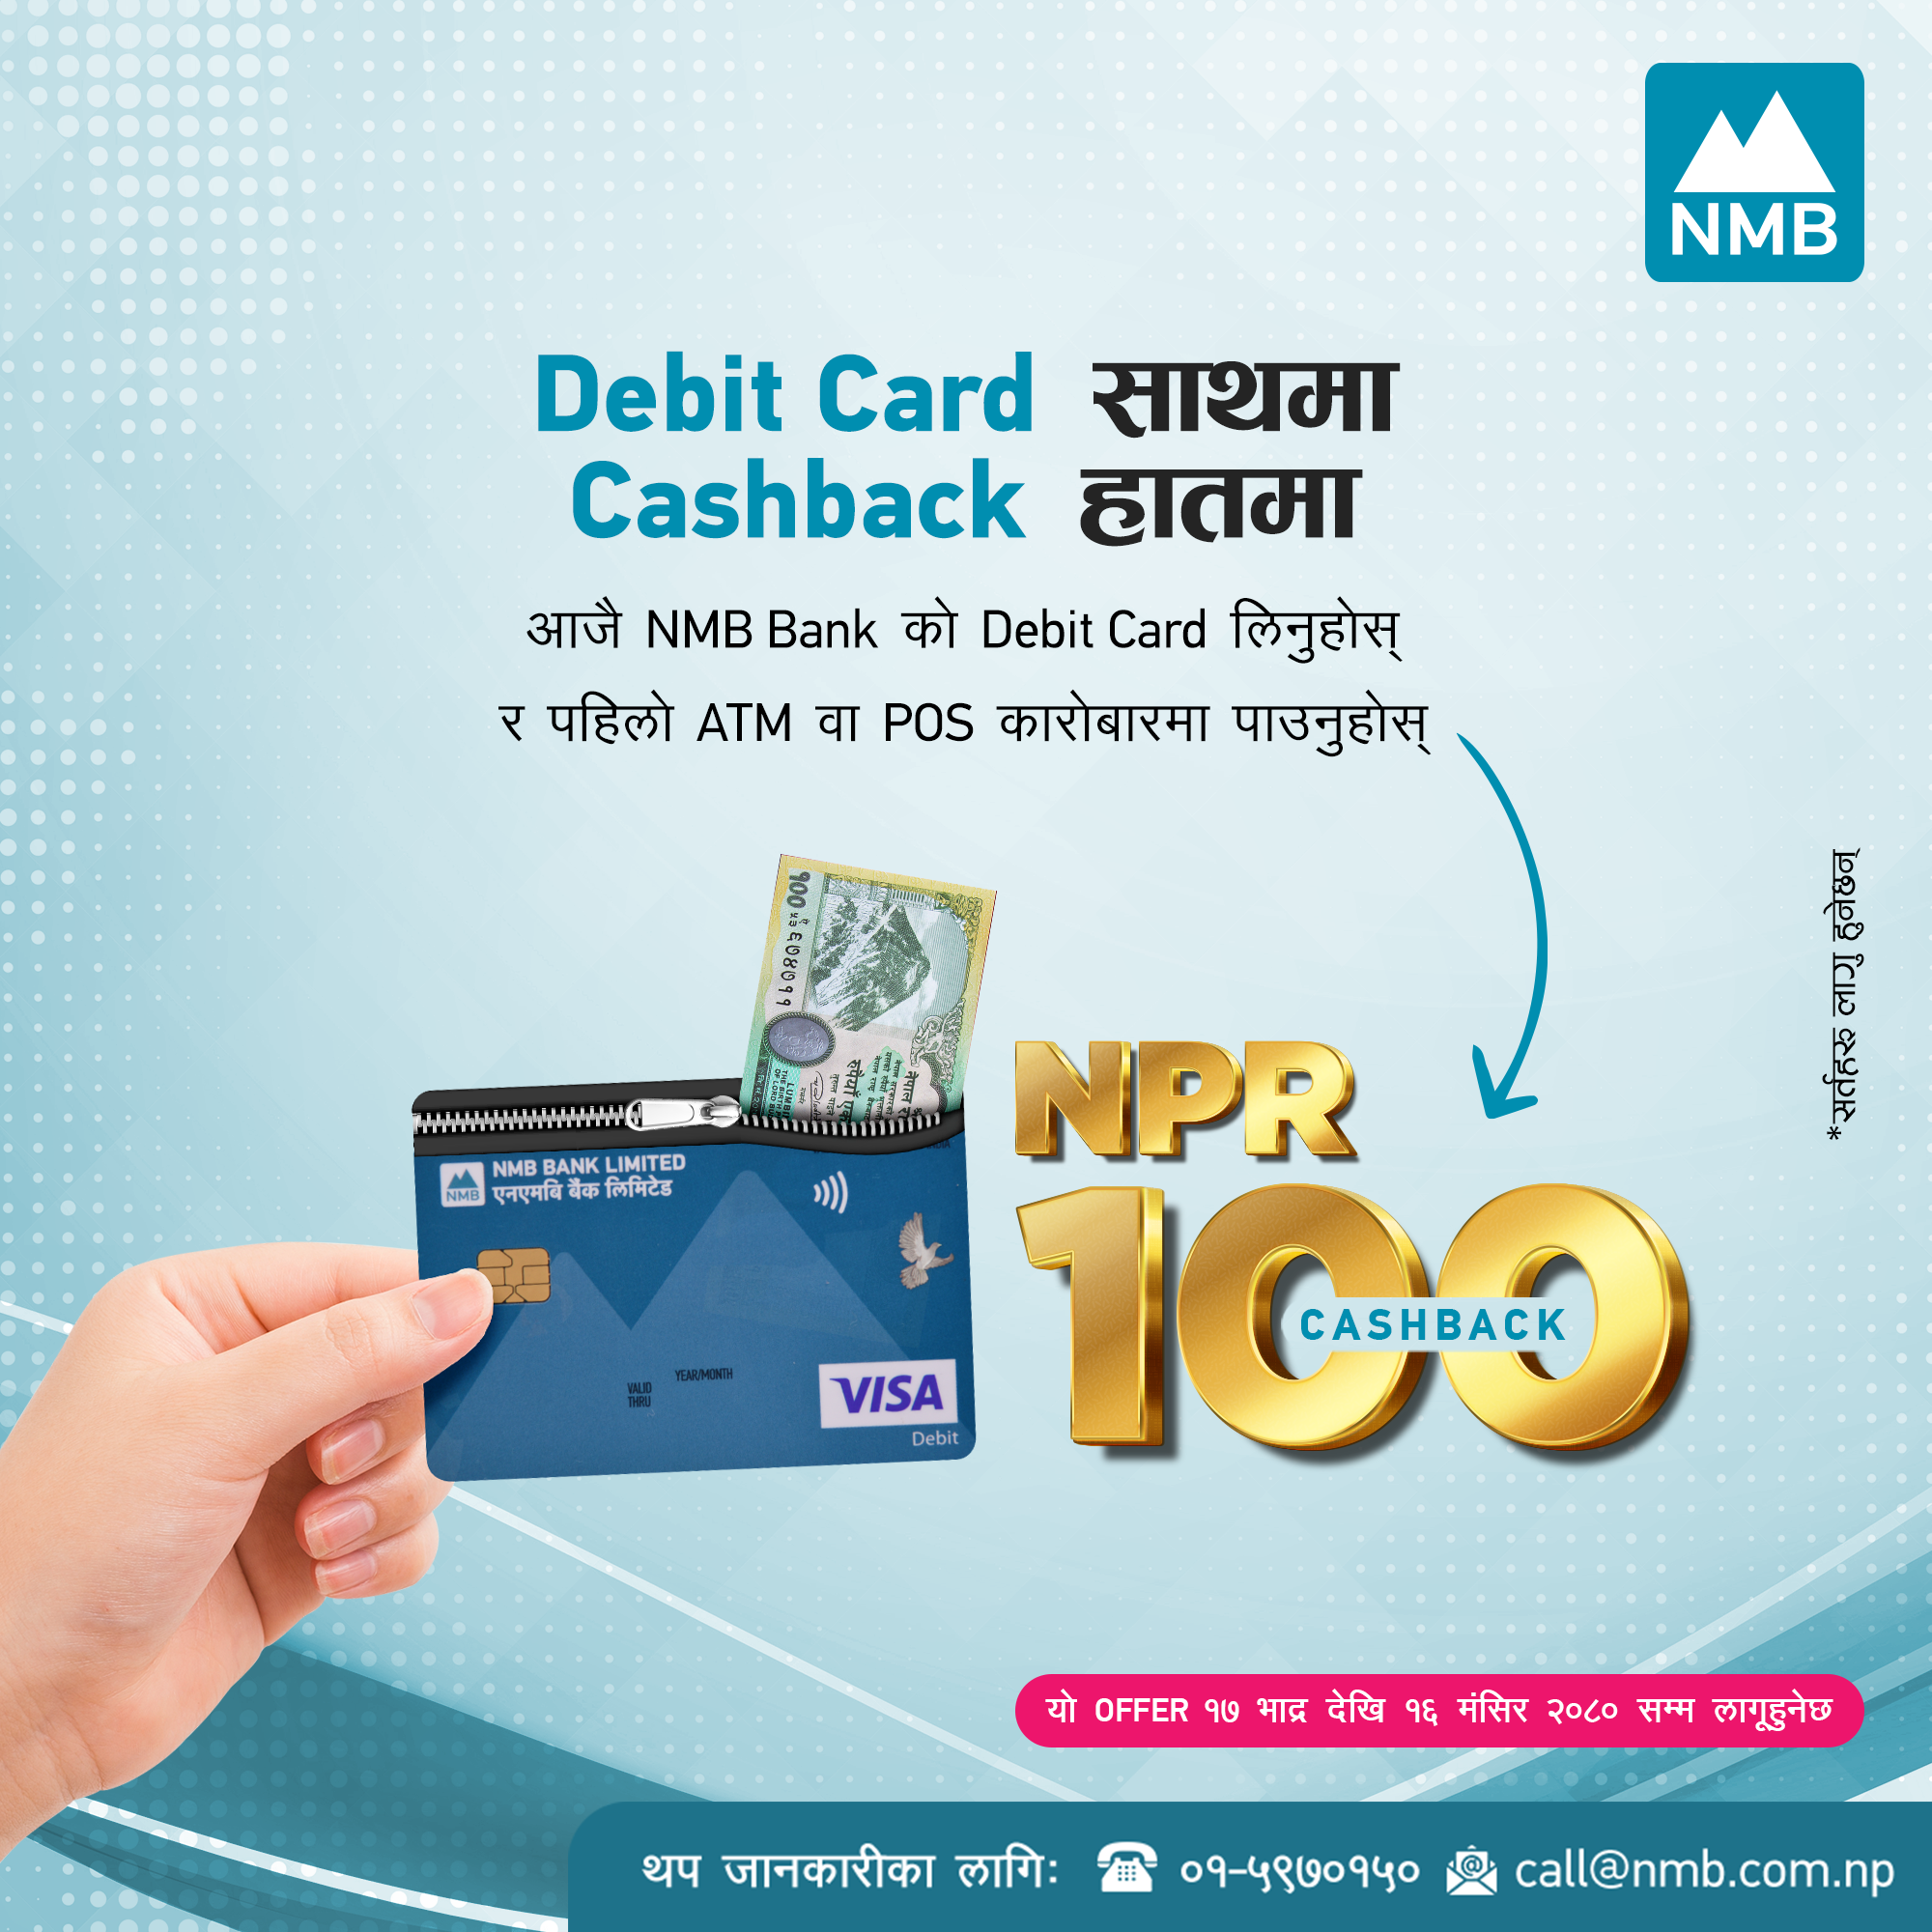 NMB Bank announces Rs. 100 cashback on Debit Card transactions